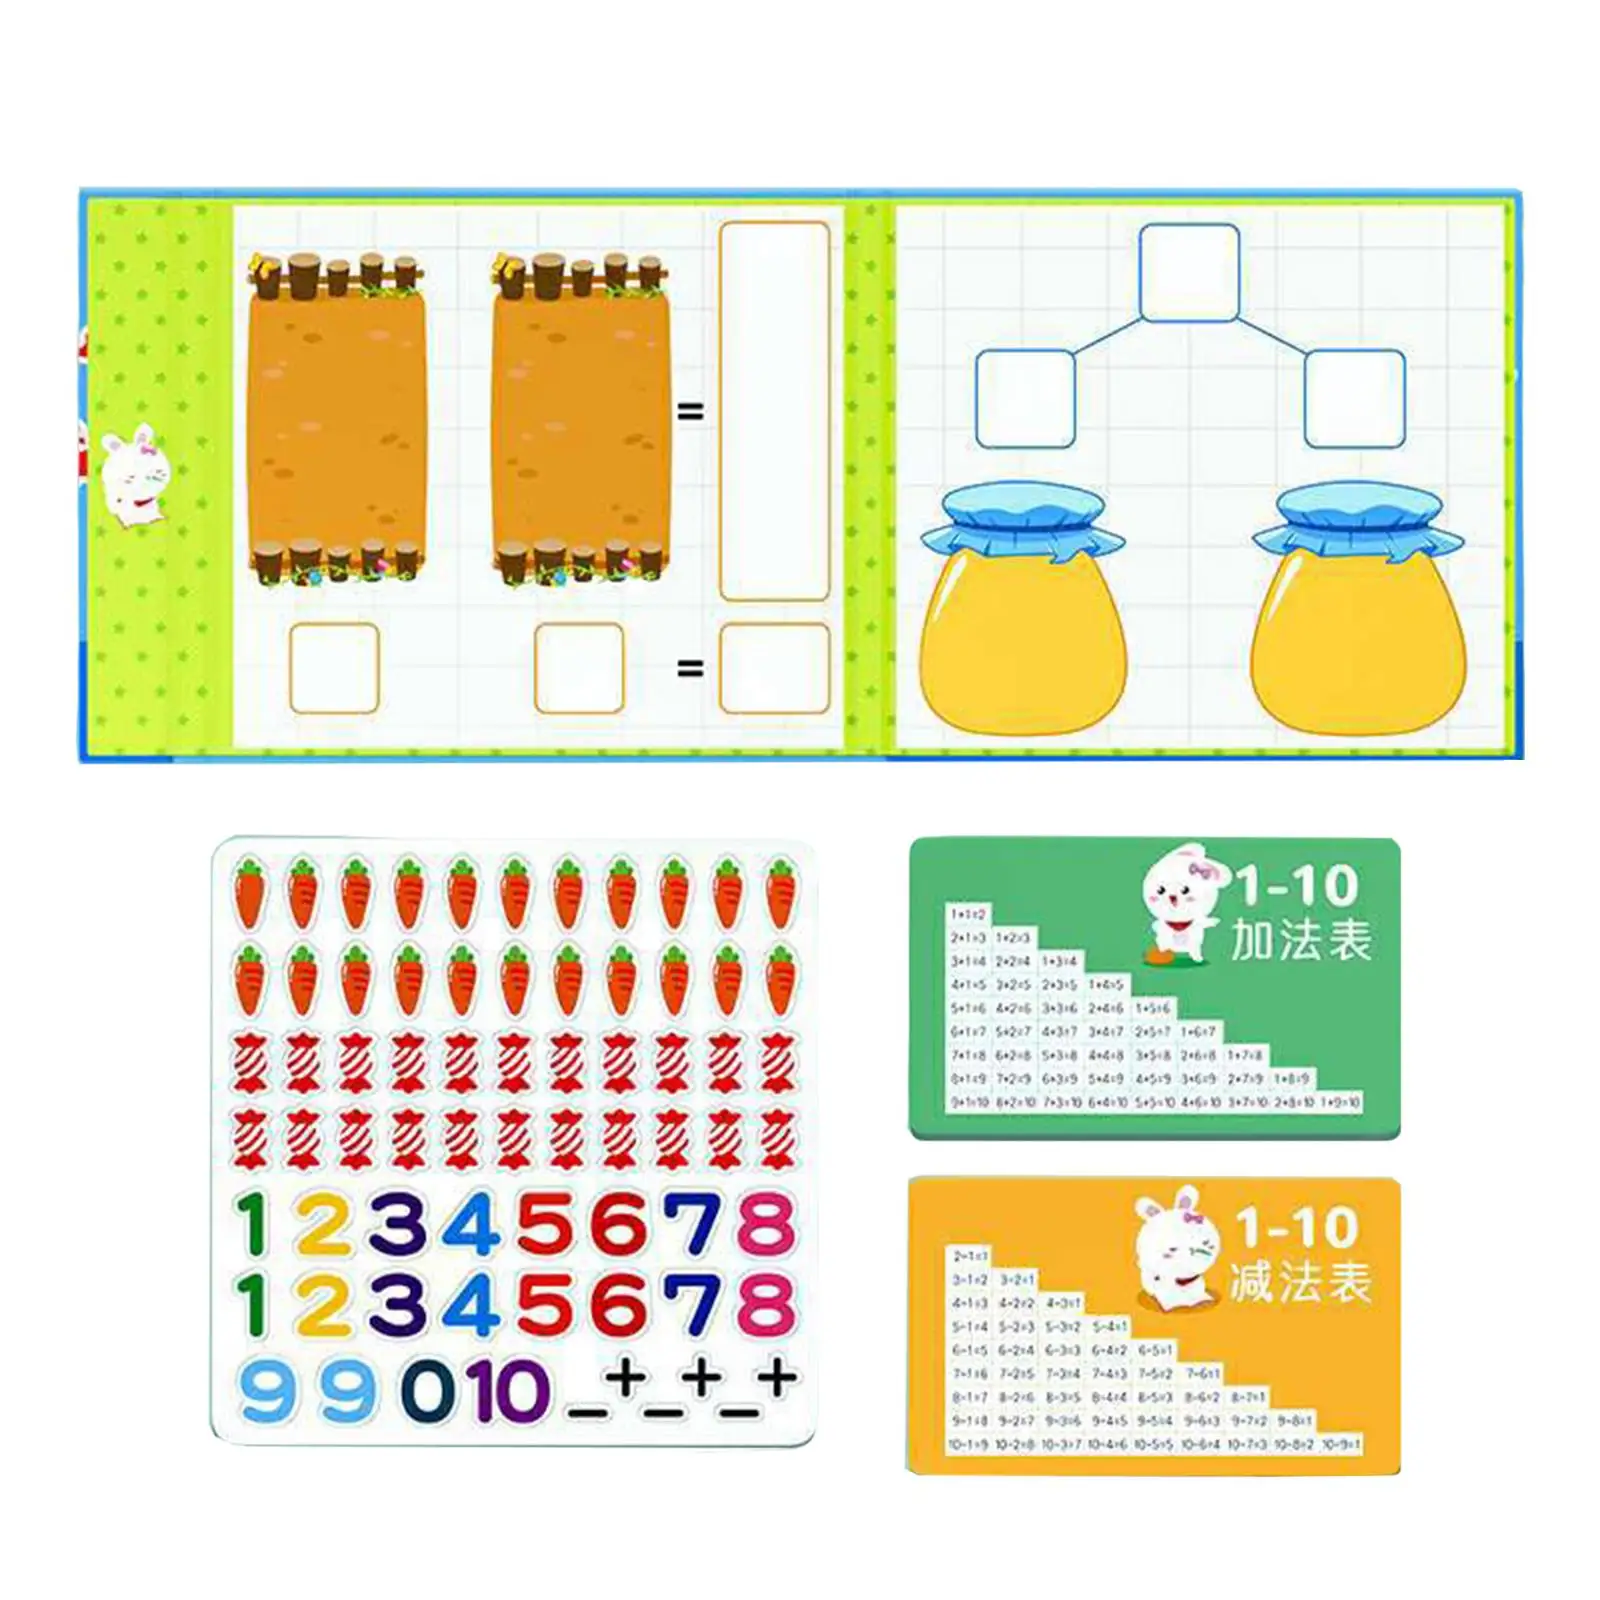 Numbers Decomposition Math Toys Arithmetic Teaching Aids Number Learning Counting for Kindergarten Home Gift Boy Toddlers